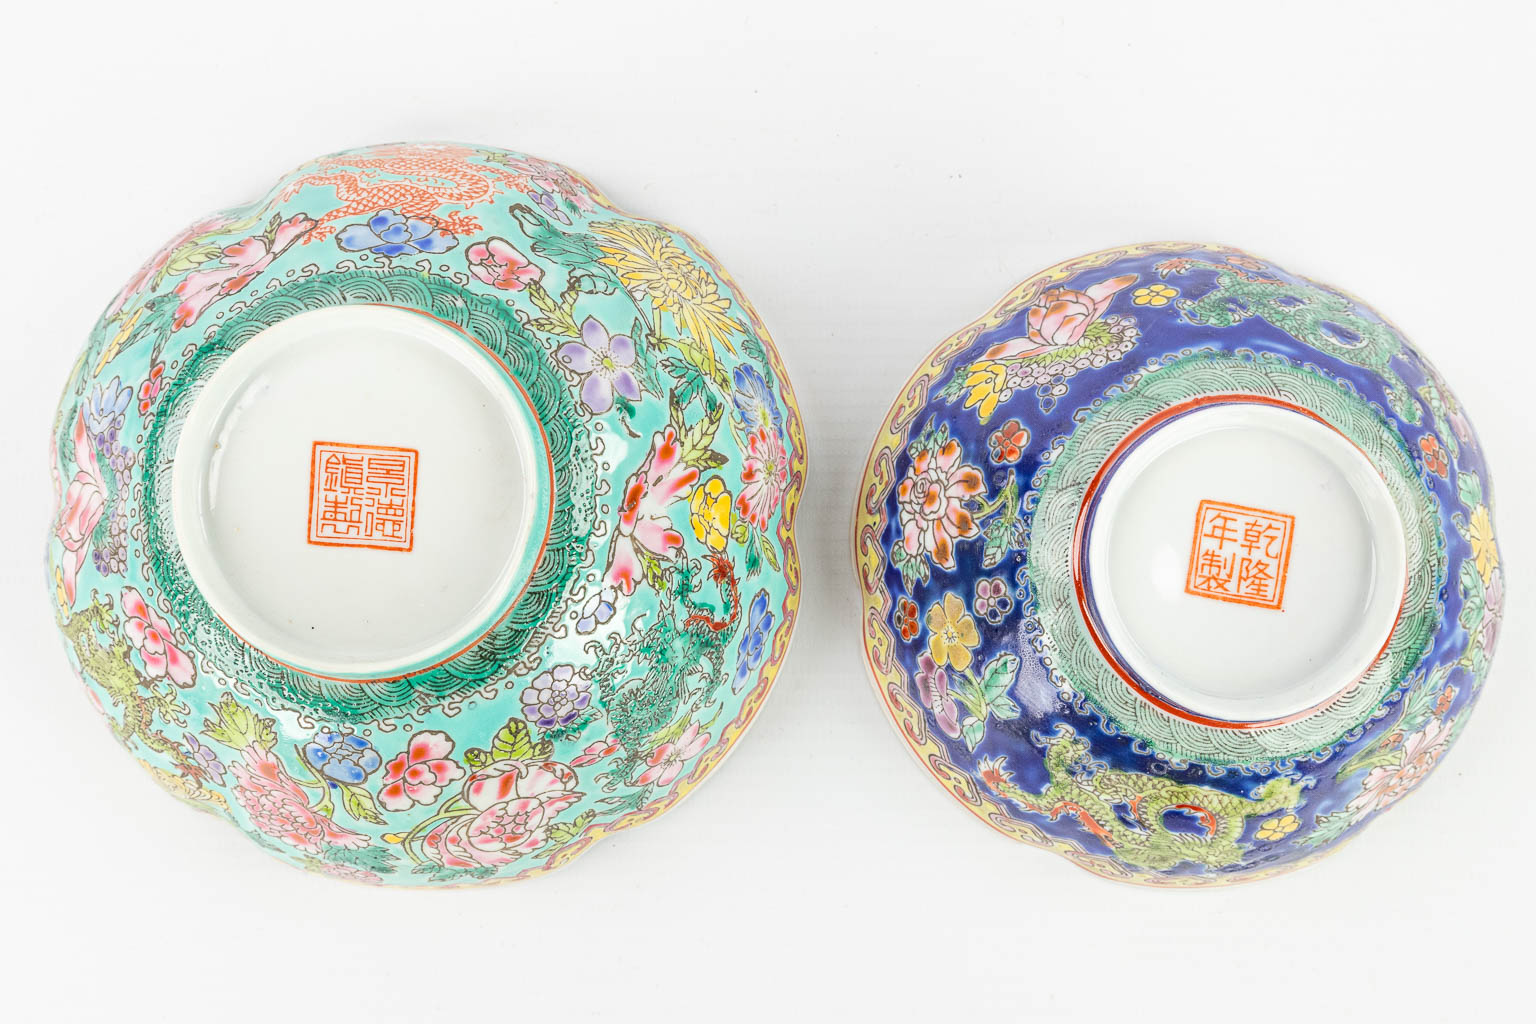 A collection of 7 Chinese bowls made of eggshell porcelain with hand-painted decor. Republic Period. (H:6cm)